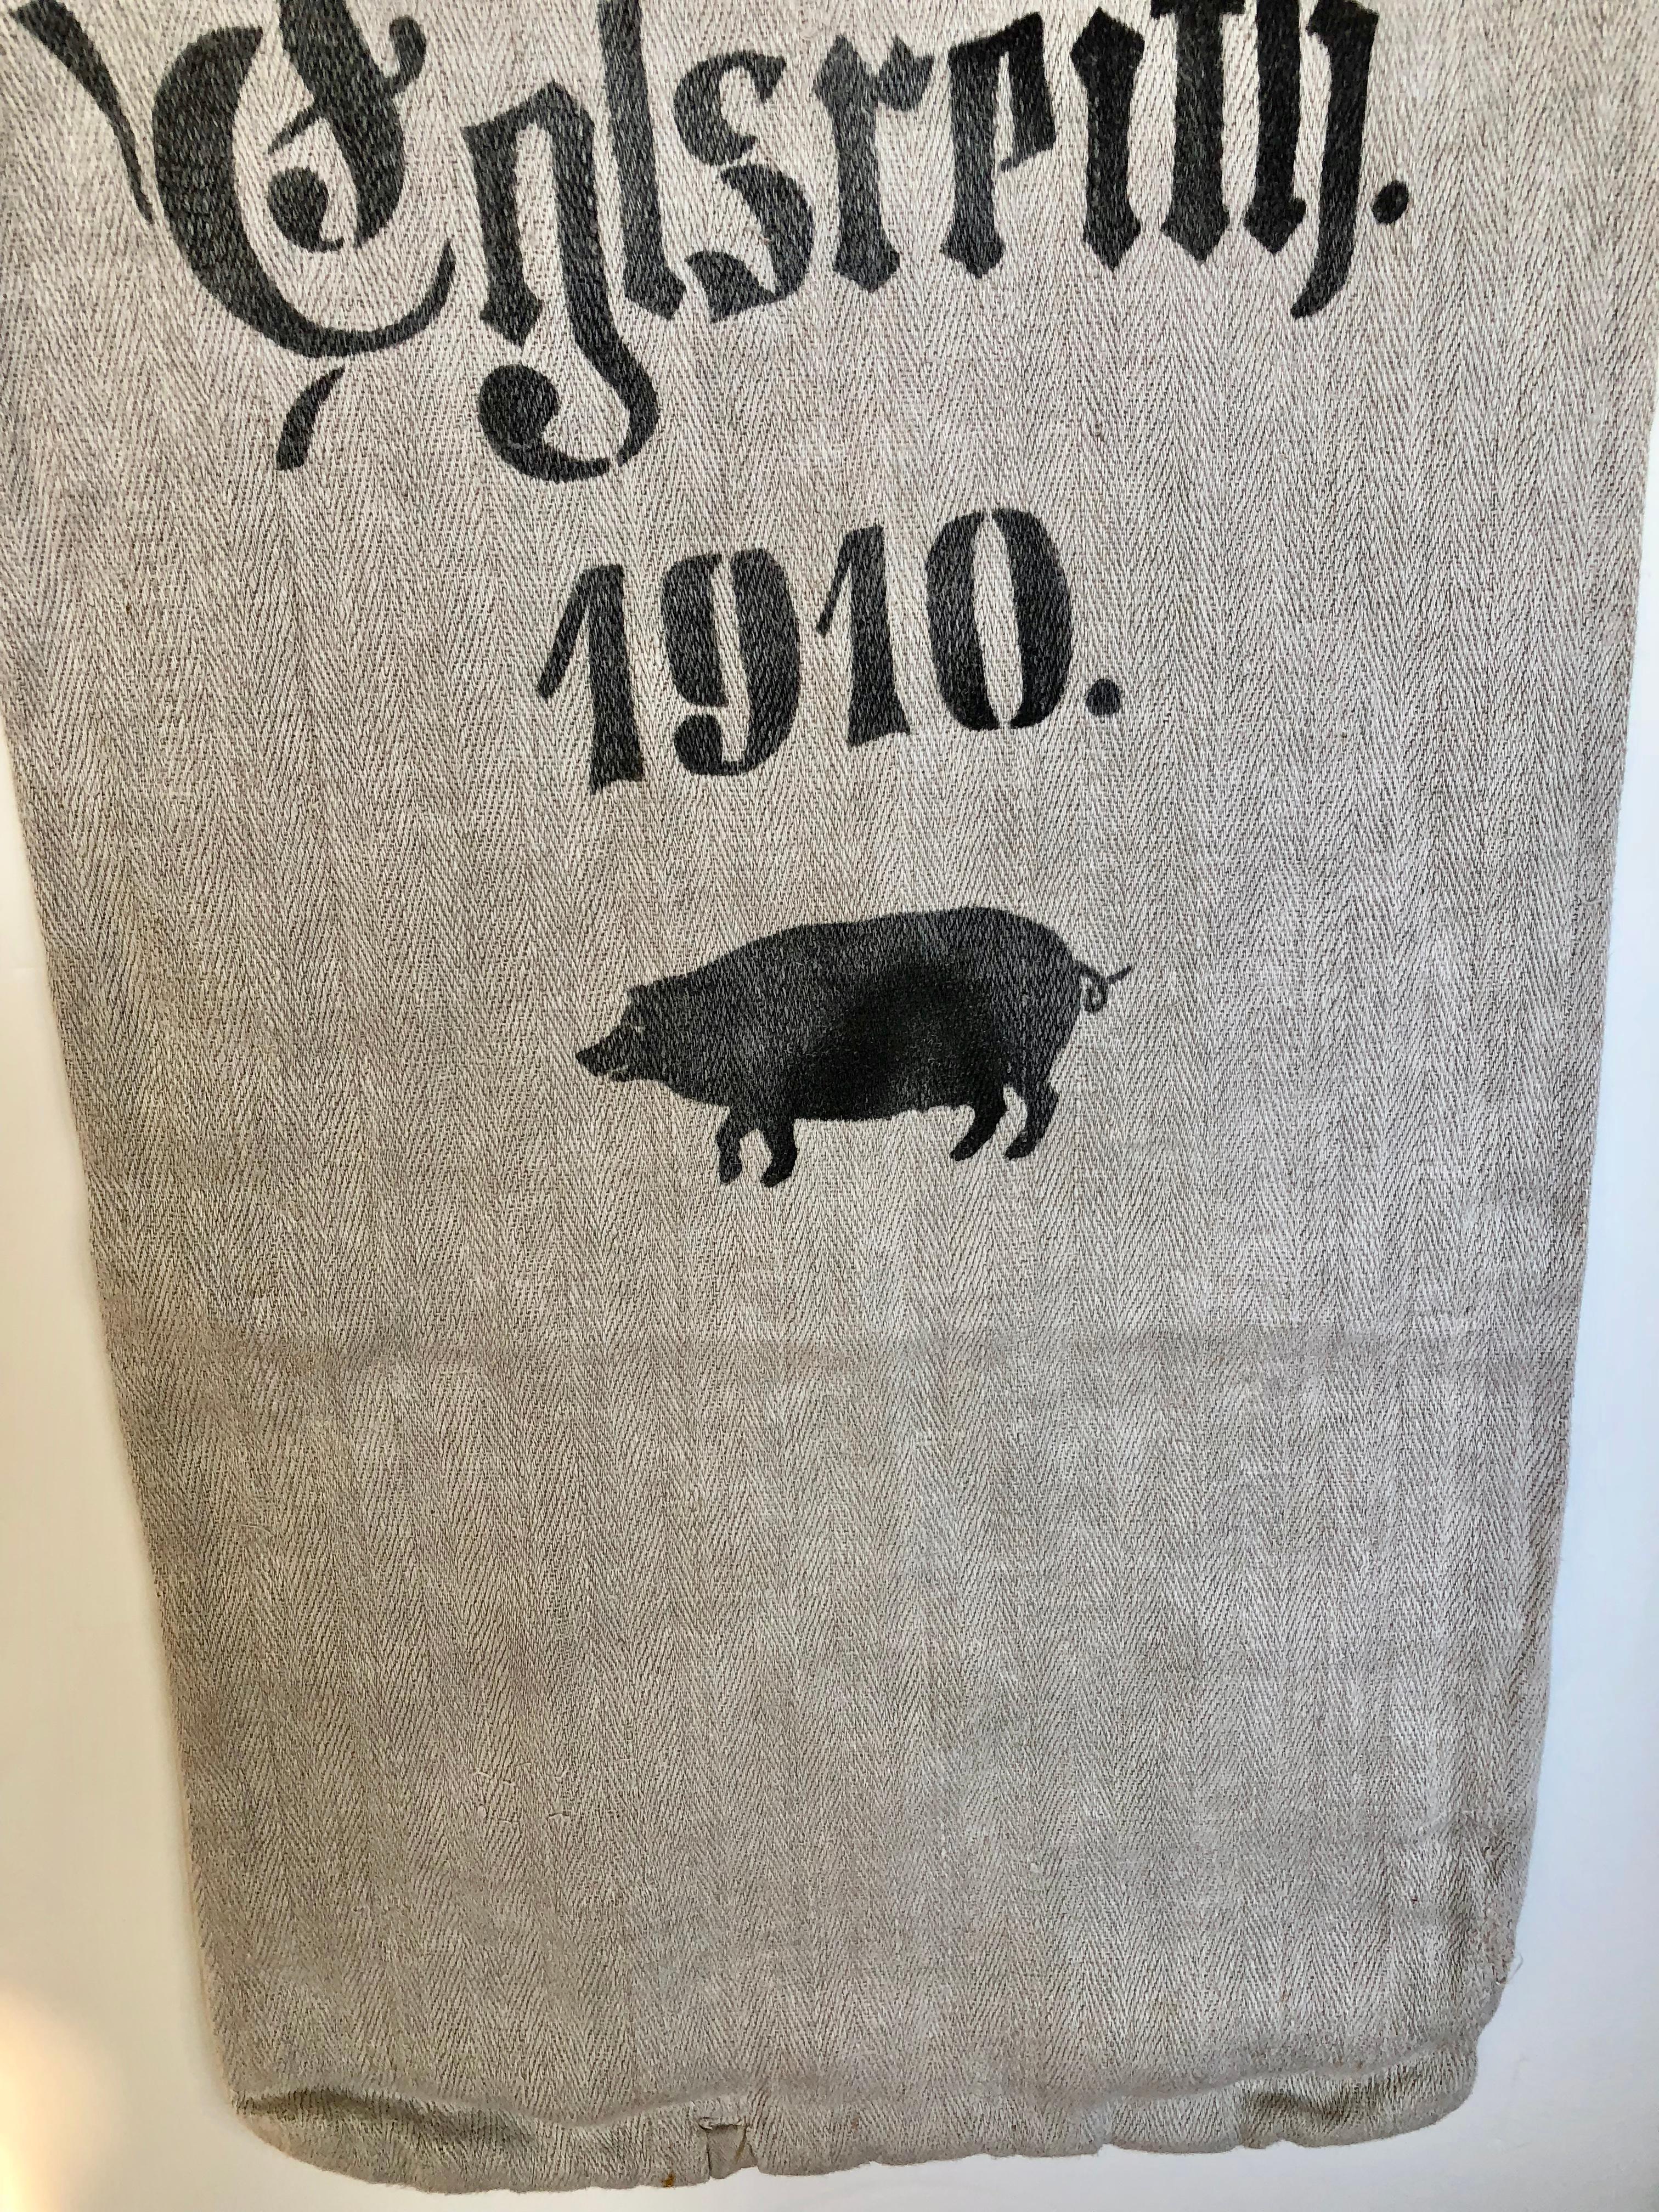 Hemp Early German Grainsack with Beautiful Original Calligraphy and Graphics, Pig For Sale